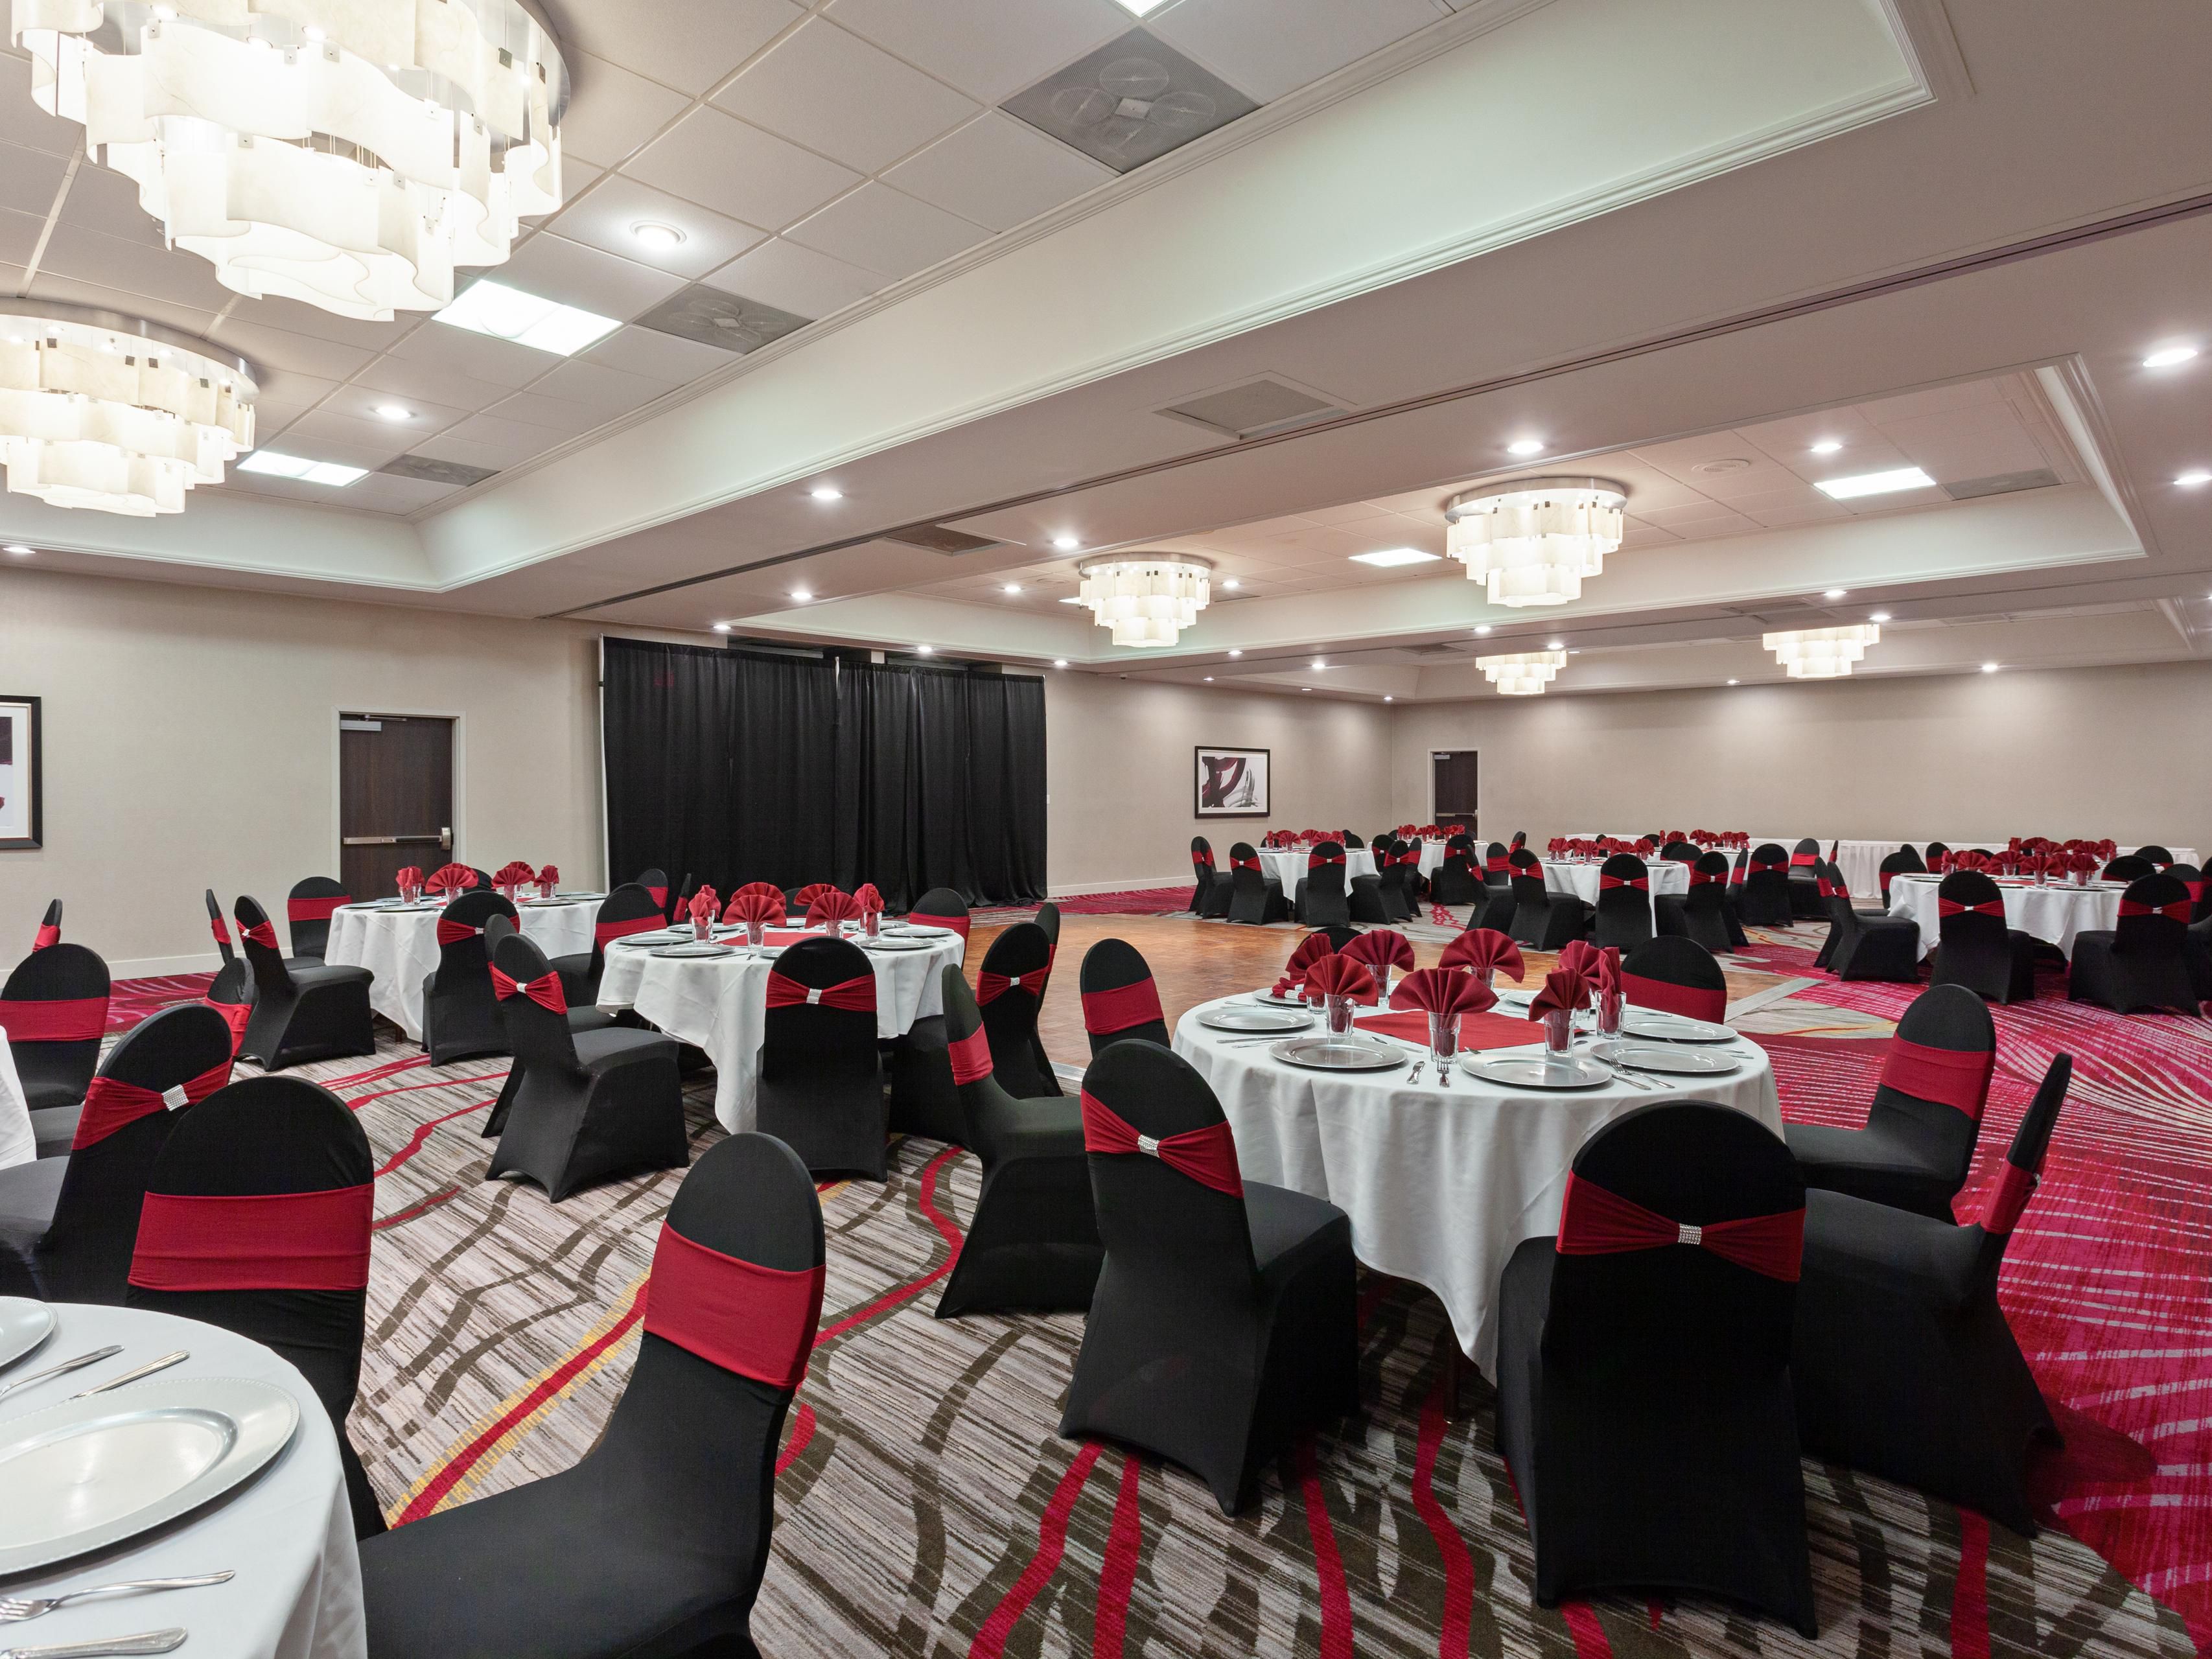 Our hotel features 12,000 square feet of flexible meeting space, making our meeting and event space ideal for conferences, seminars, and galas. All our rooms are outfitted with the audio and visual technology needed for any type of presentation. Plus, you can easily plan your event with the help of our hotel's Meetings Director.